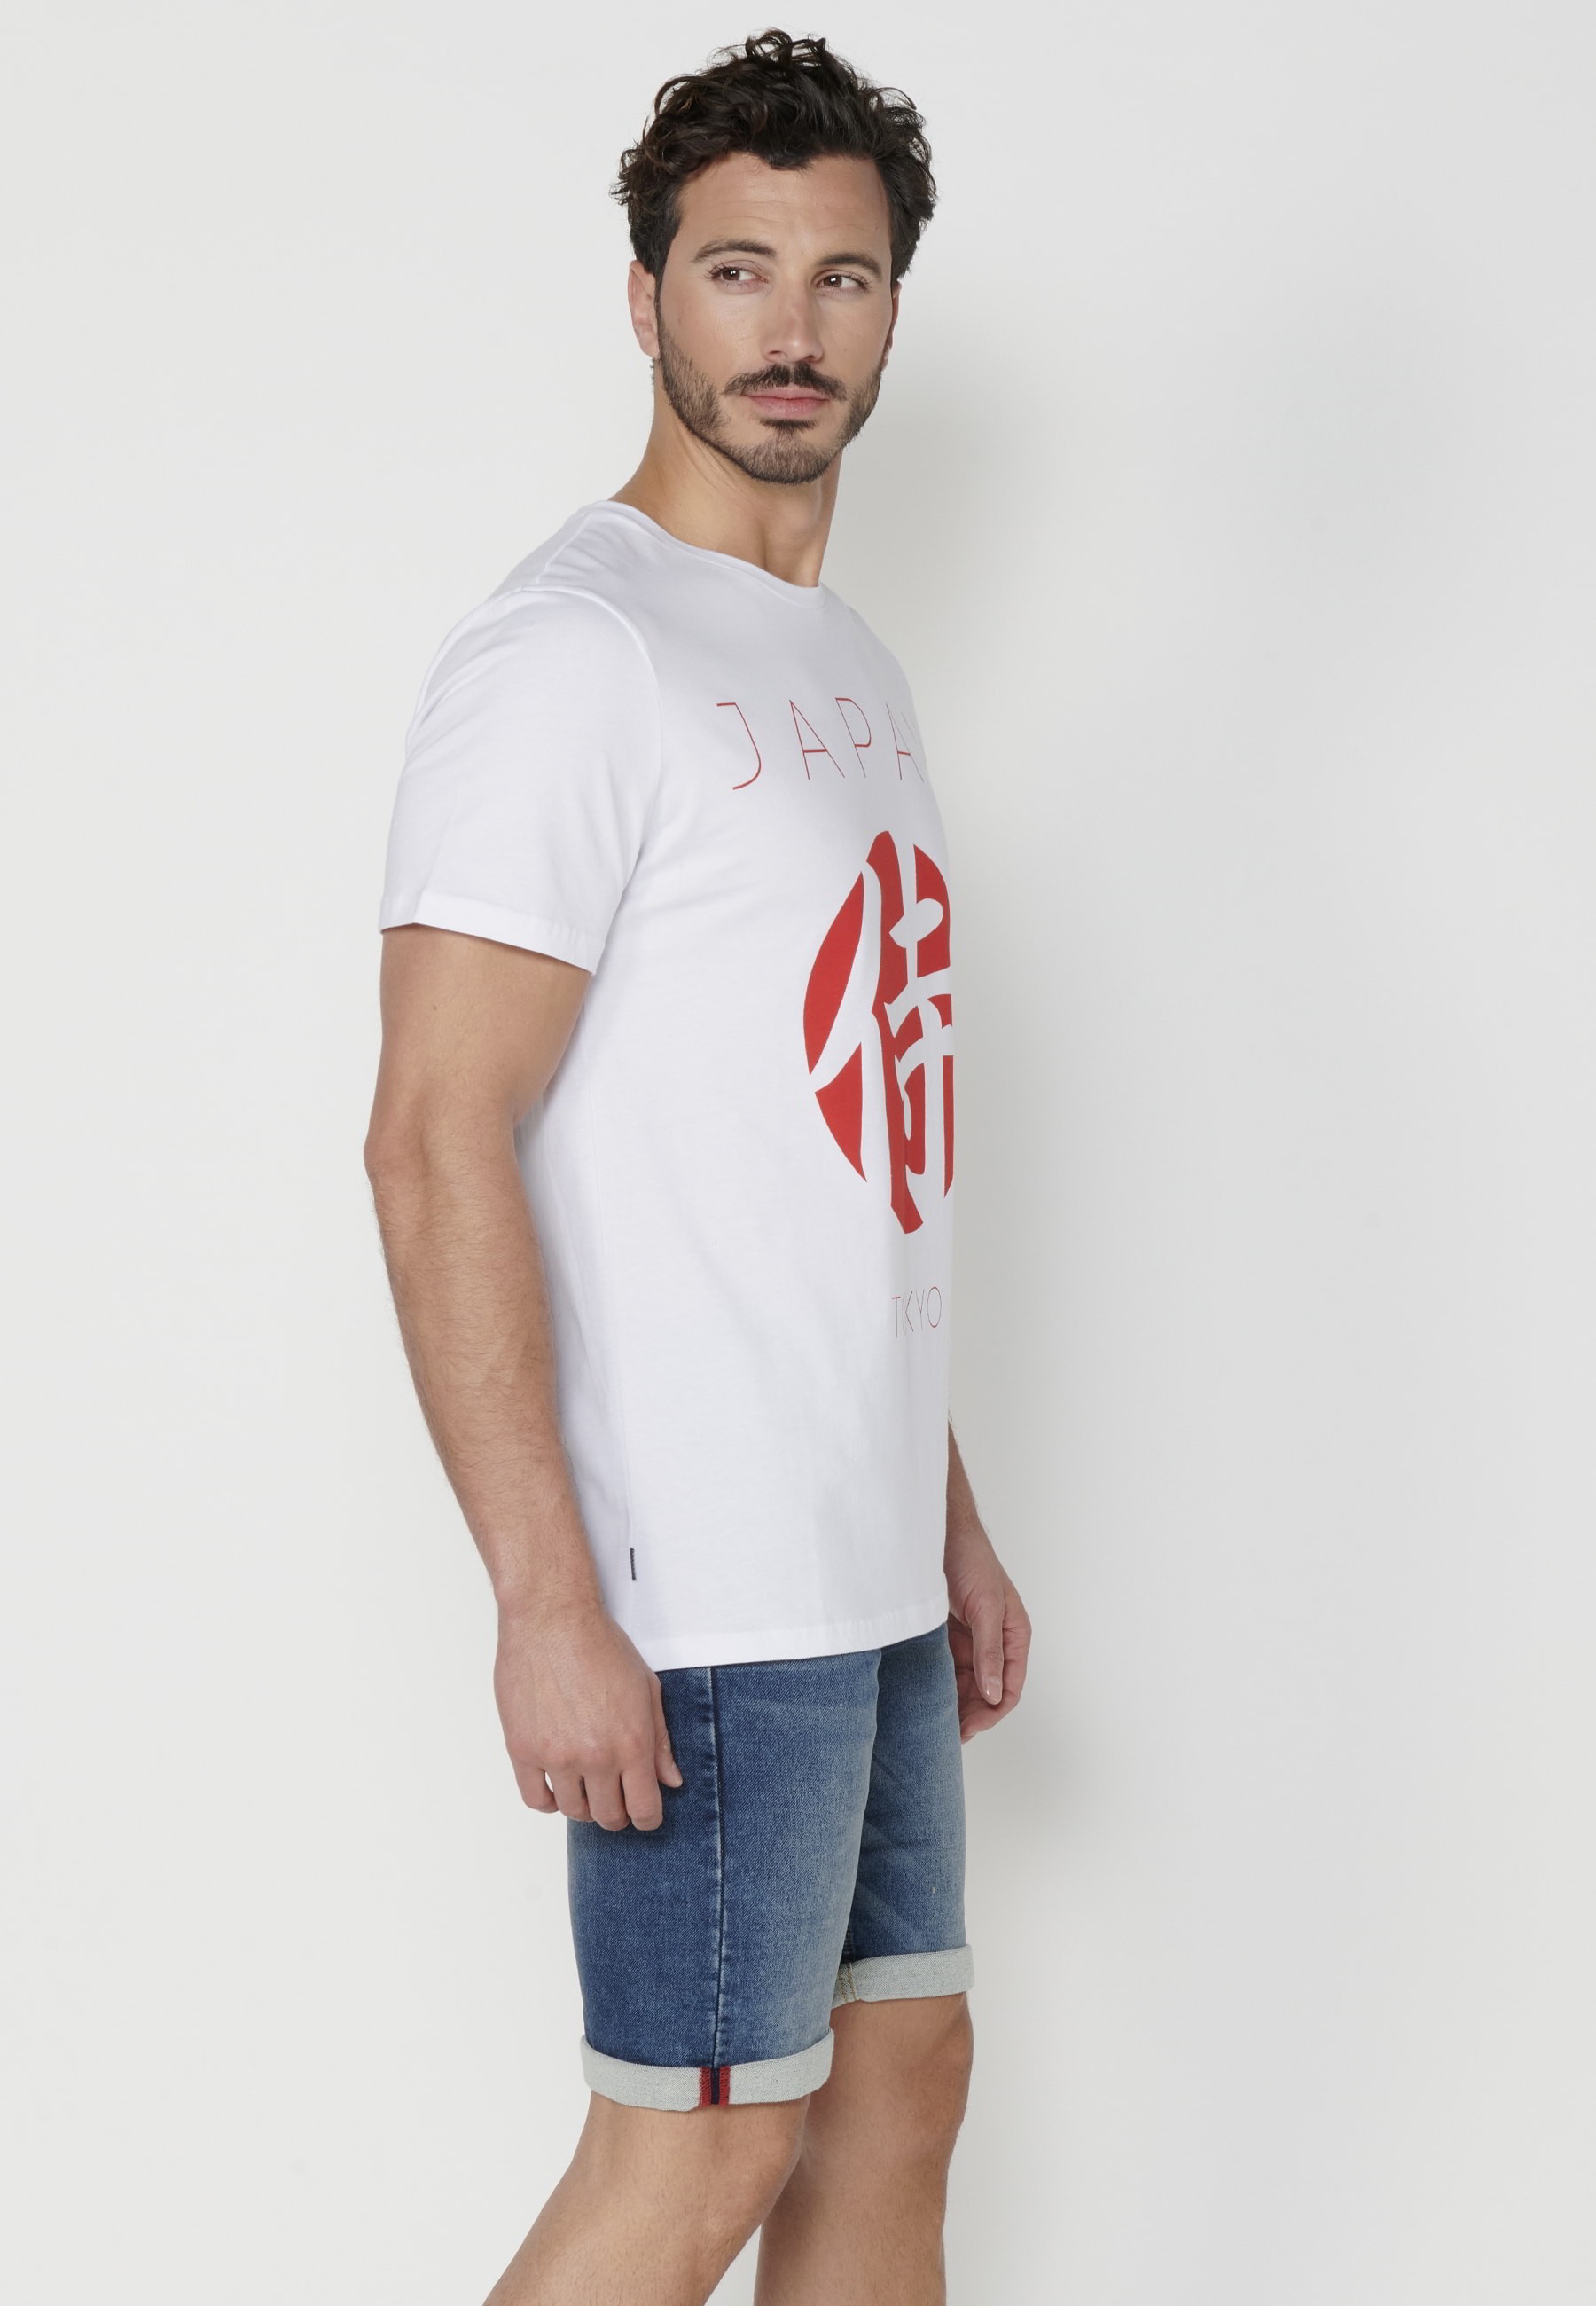 Short-Sleeved Cotton T-shirt with a White Print on the front and sleeves for Men